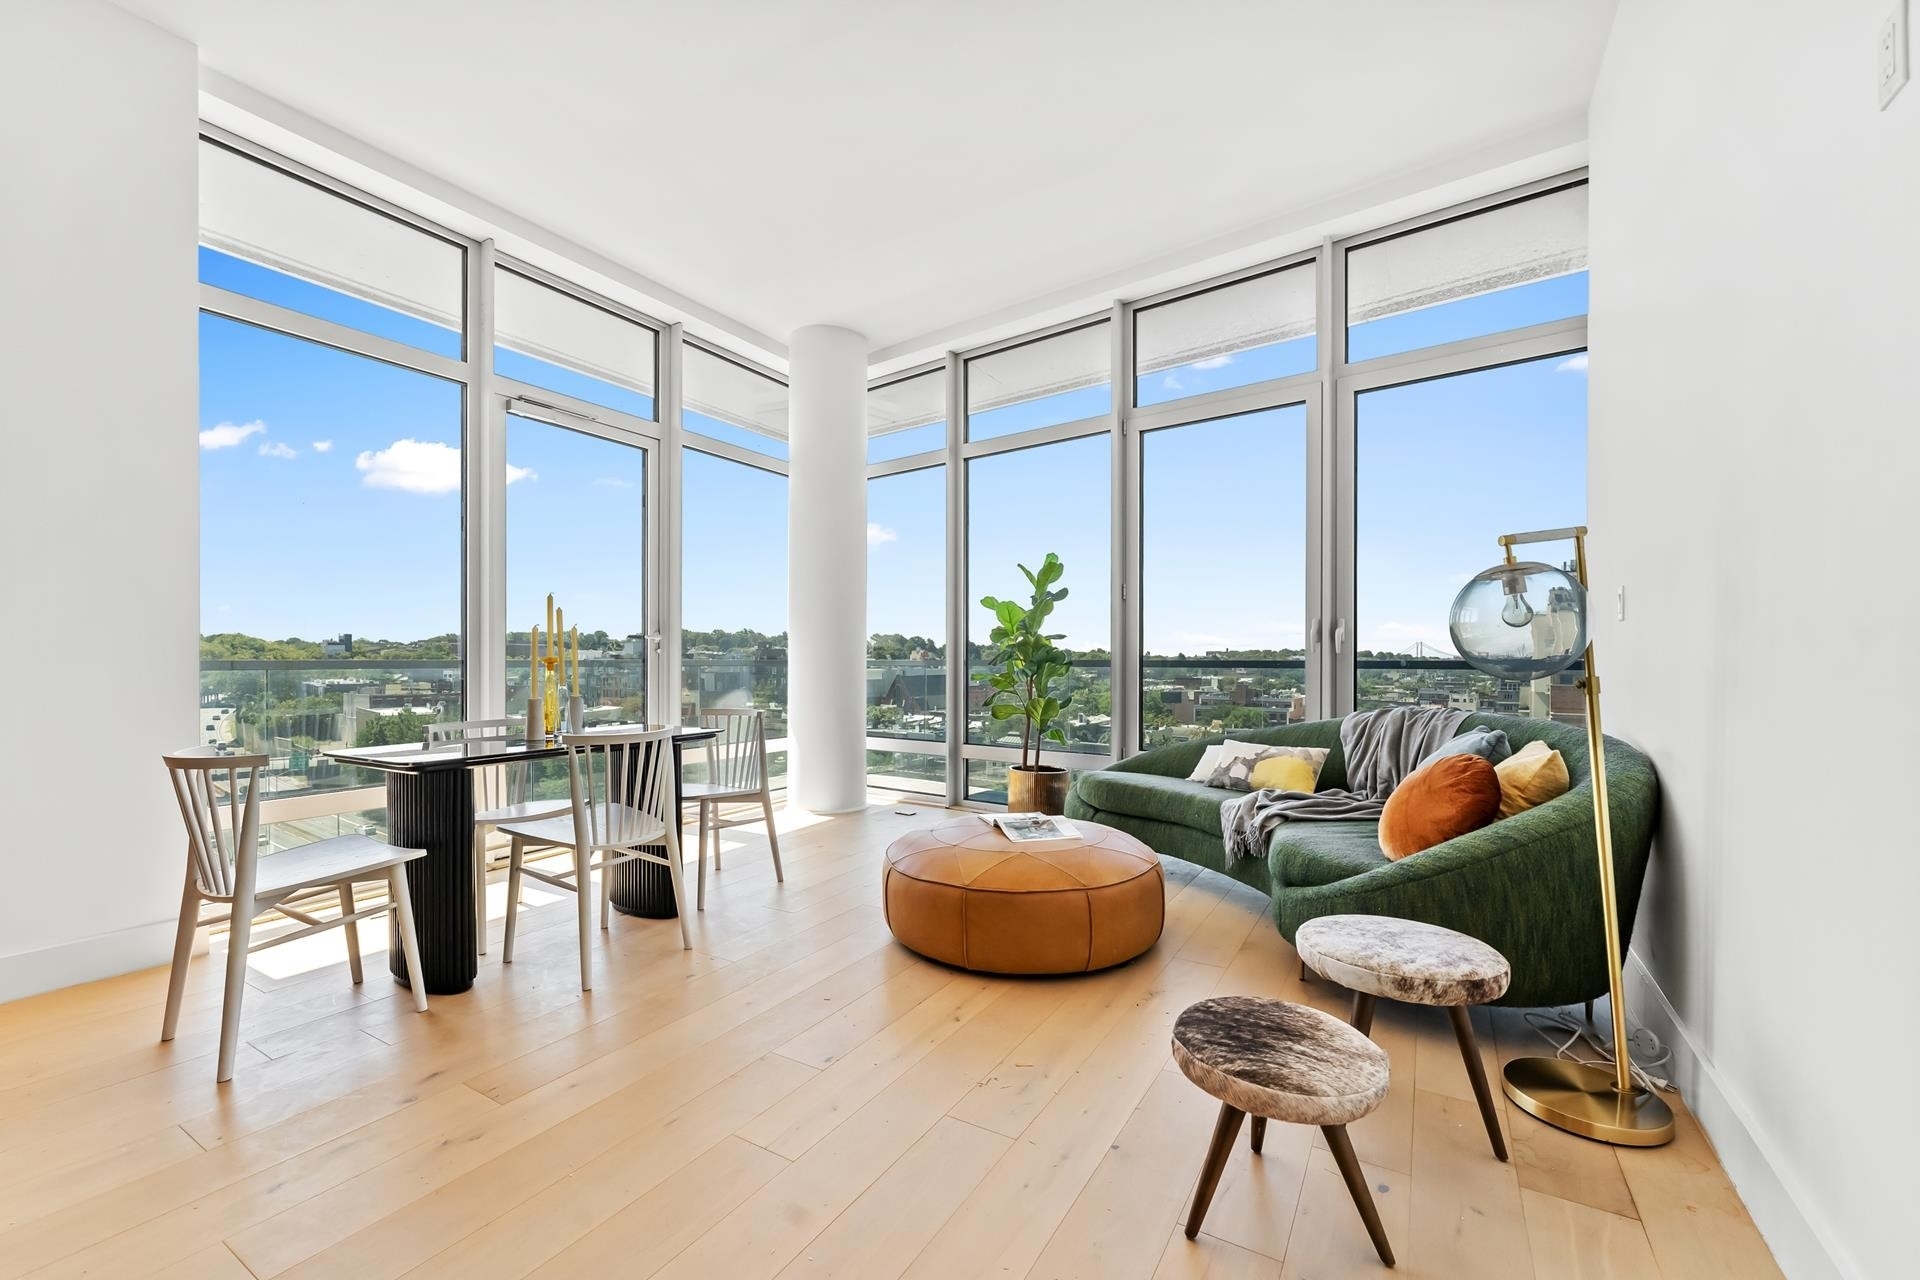 Condominium for Sale at 575 4TH AVE, 6F Park Slope, Brooklyn, NY 11215